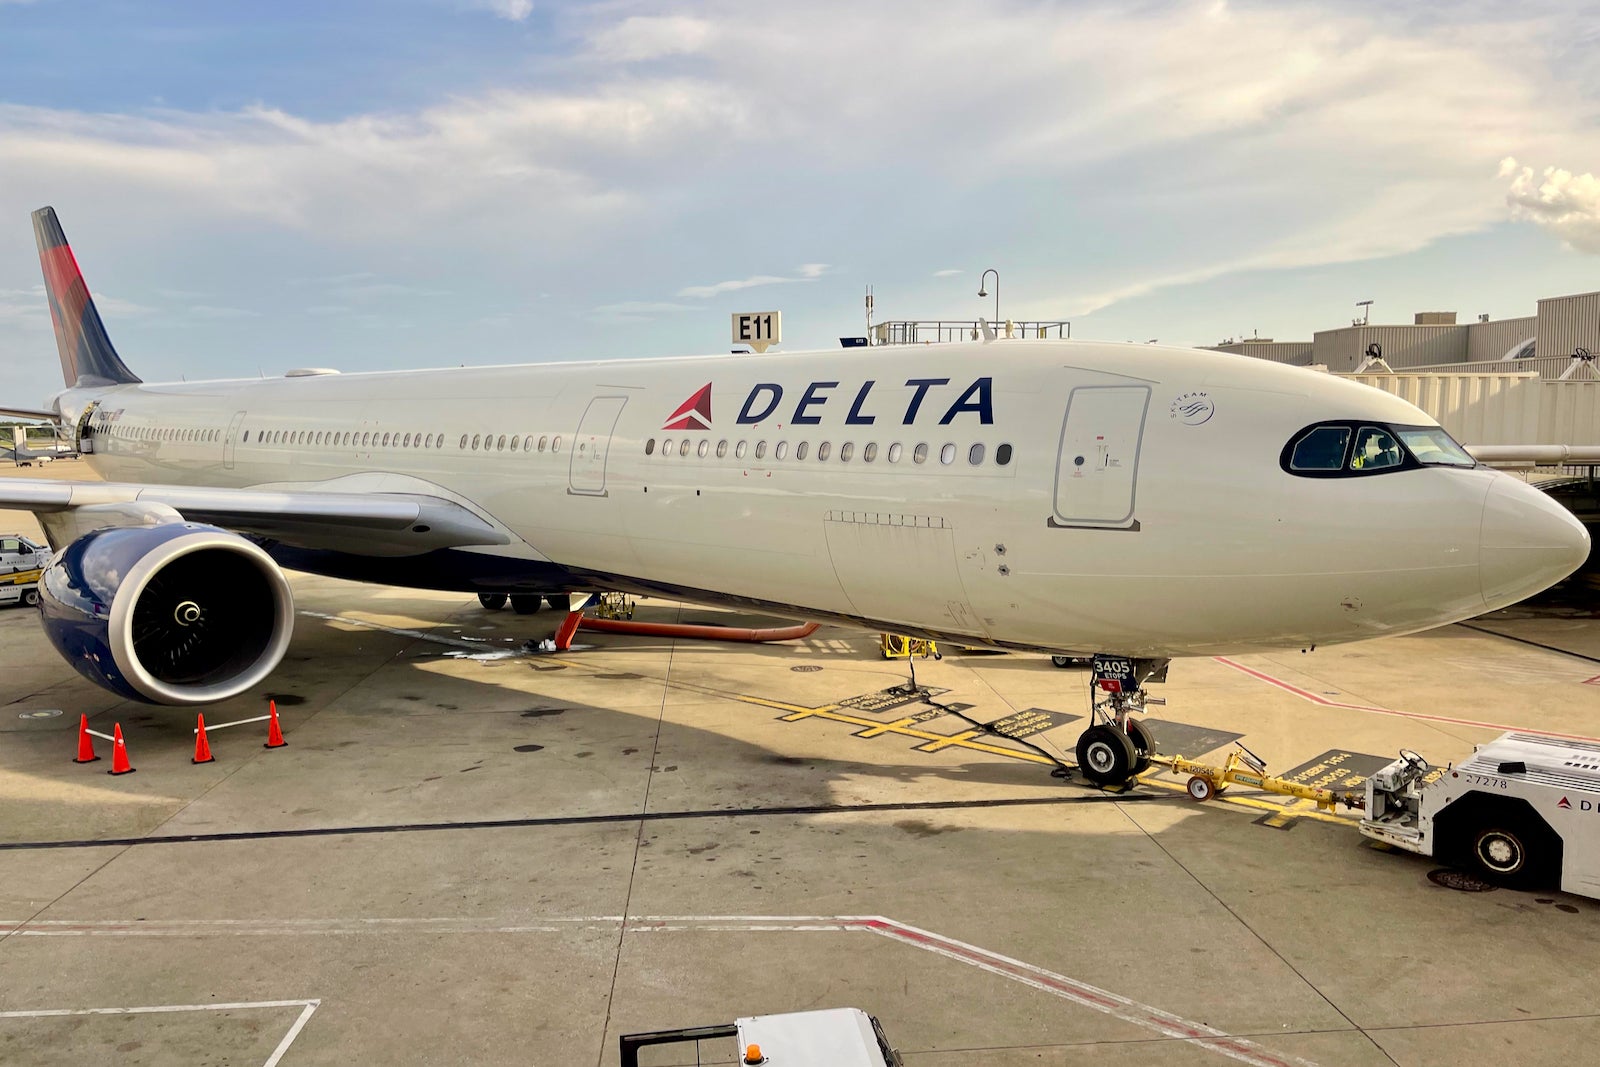 Delta grows in Boston, challenging AA and JetBlue with 5 new high-profile routes